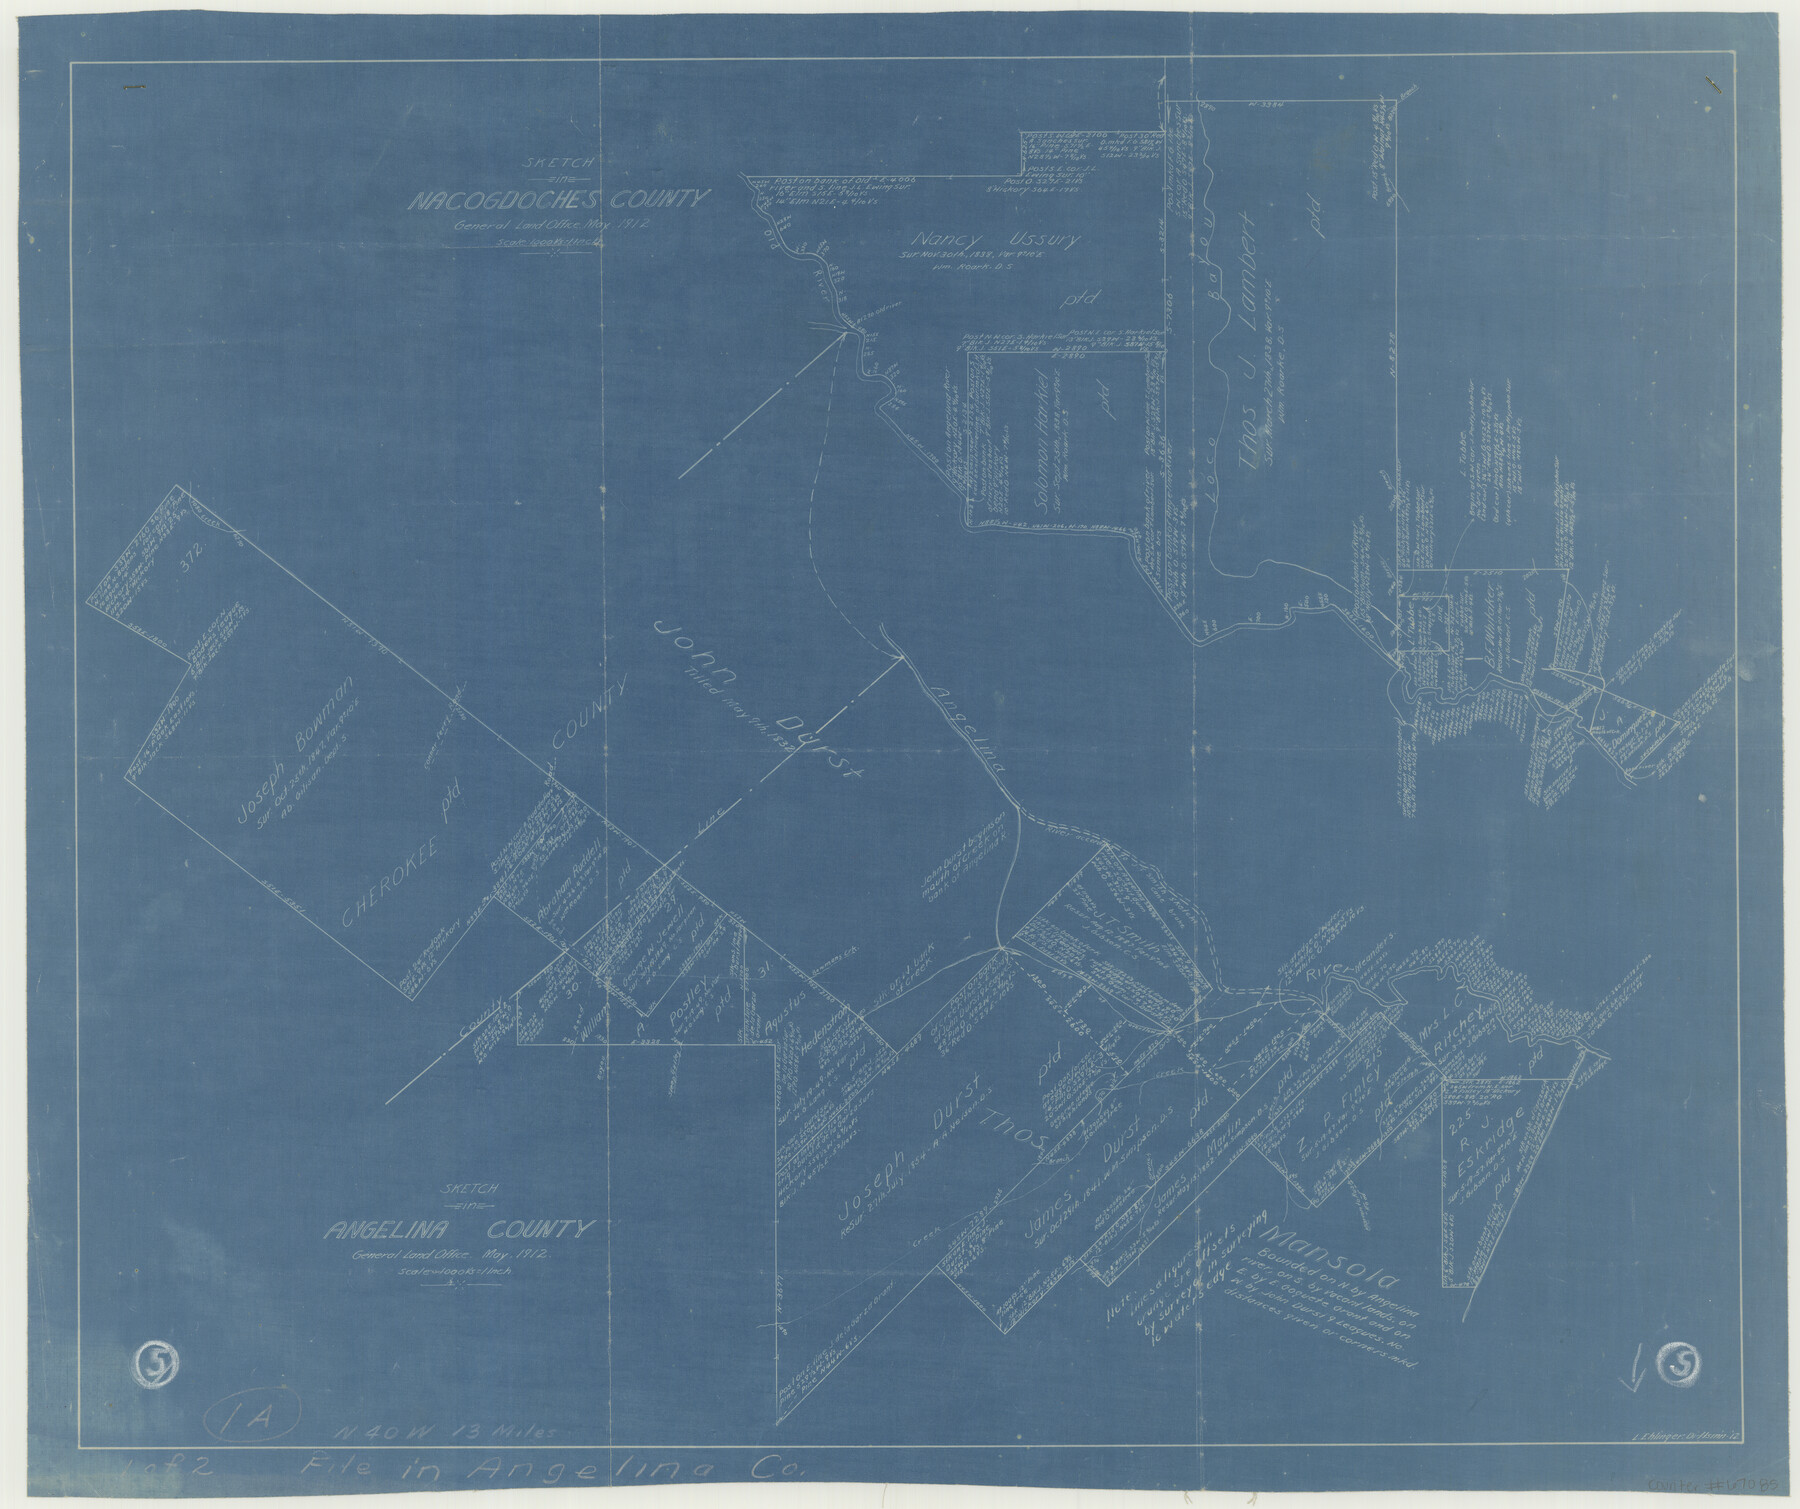 67085, Angelina County Working Sketch 5, General Map Collection